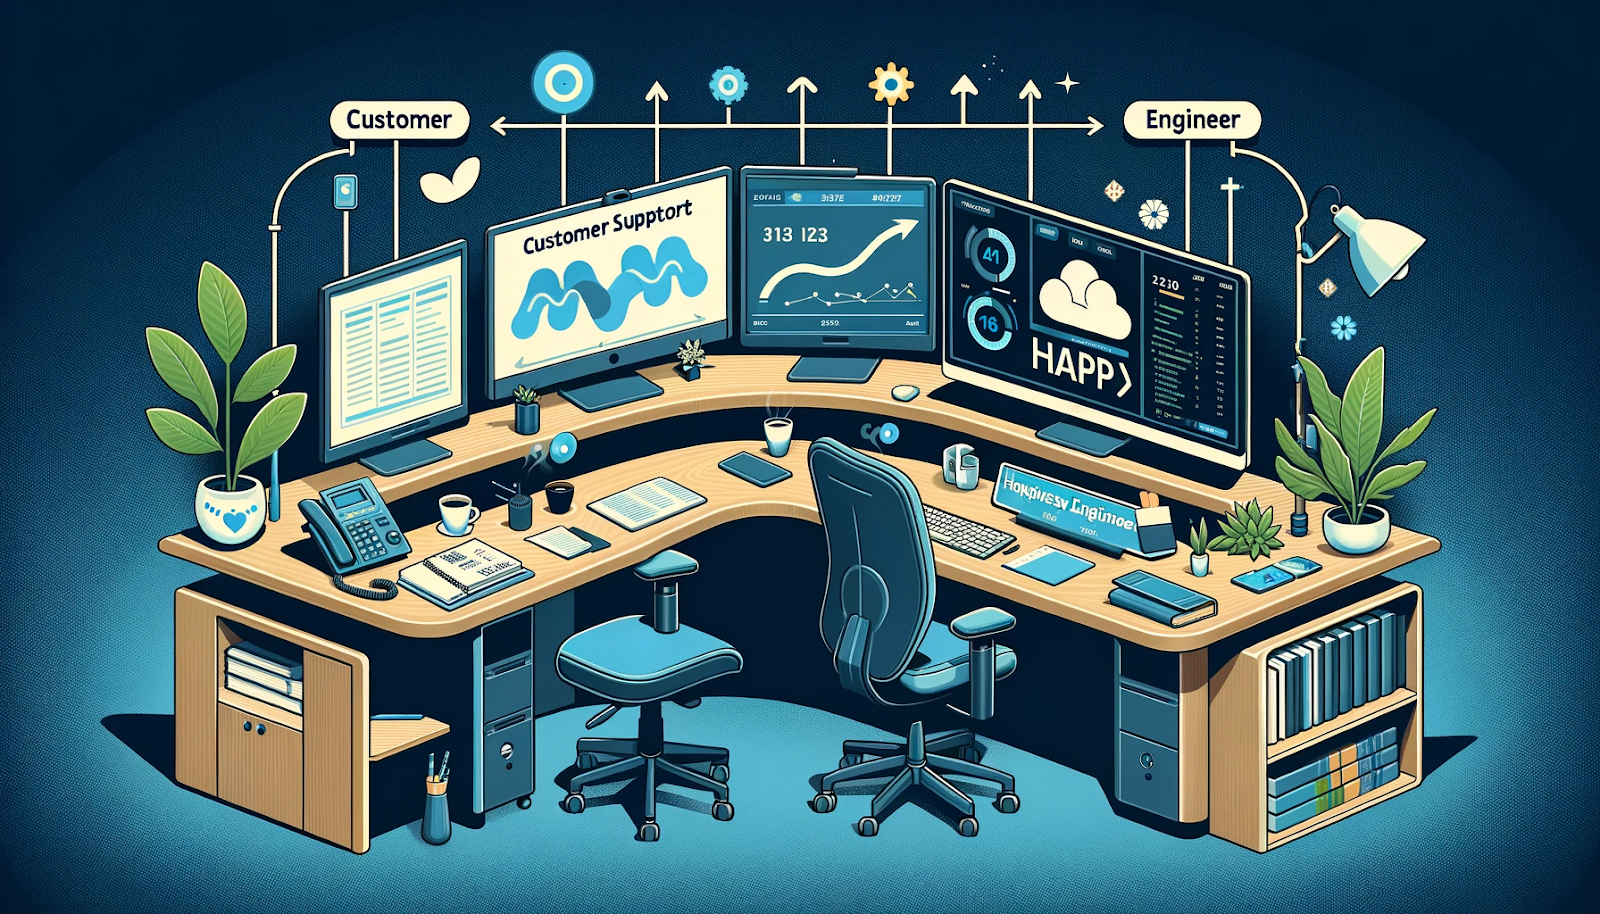 Modern illustration of a desk evolving from customer support to data science. The left side shows a customer support setting with a phone, notepad, and 'Happiness Engineer' nameplate. The right side transforms into a data scientist's workspace with dual monitors displaying data visualizations and code. Personal elements like a coffee cup and plant are included.